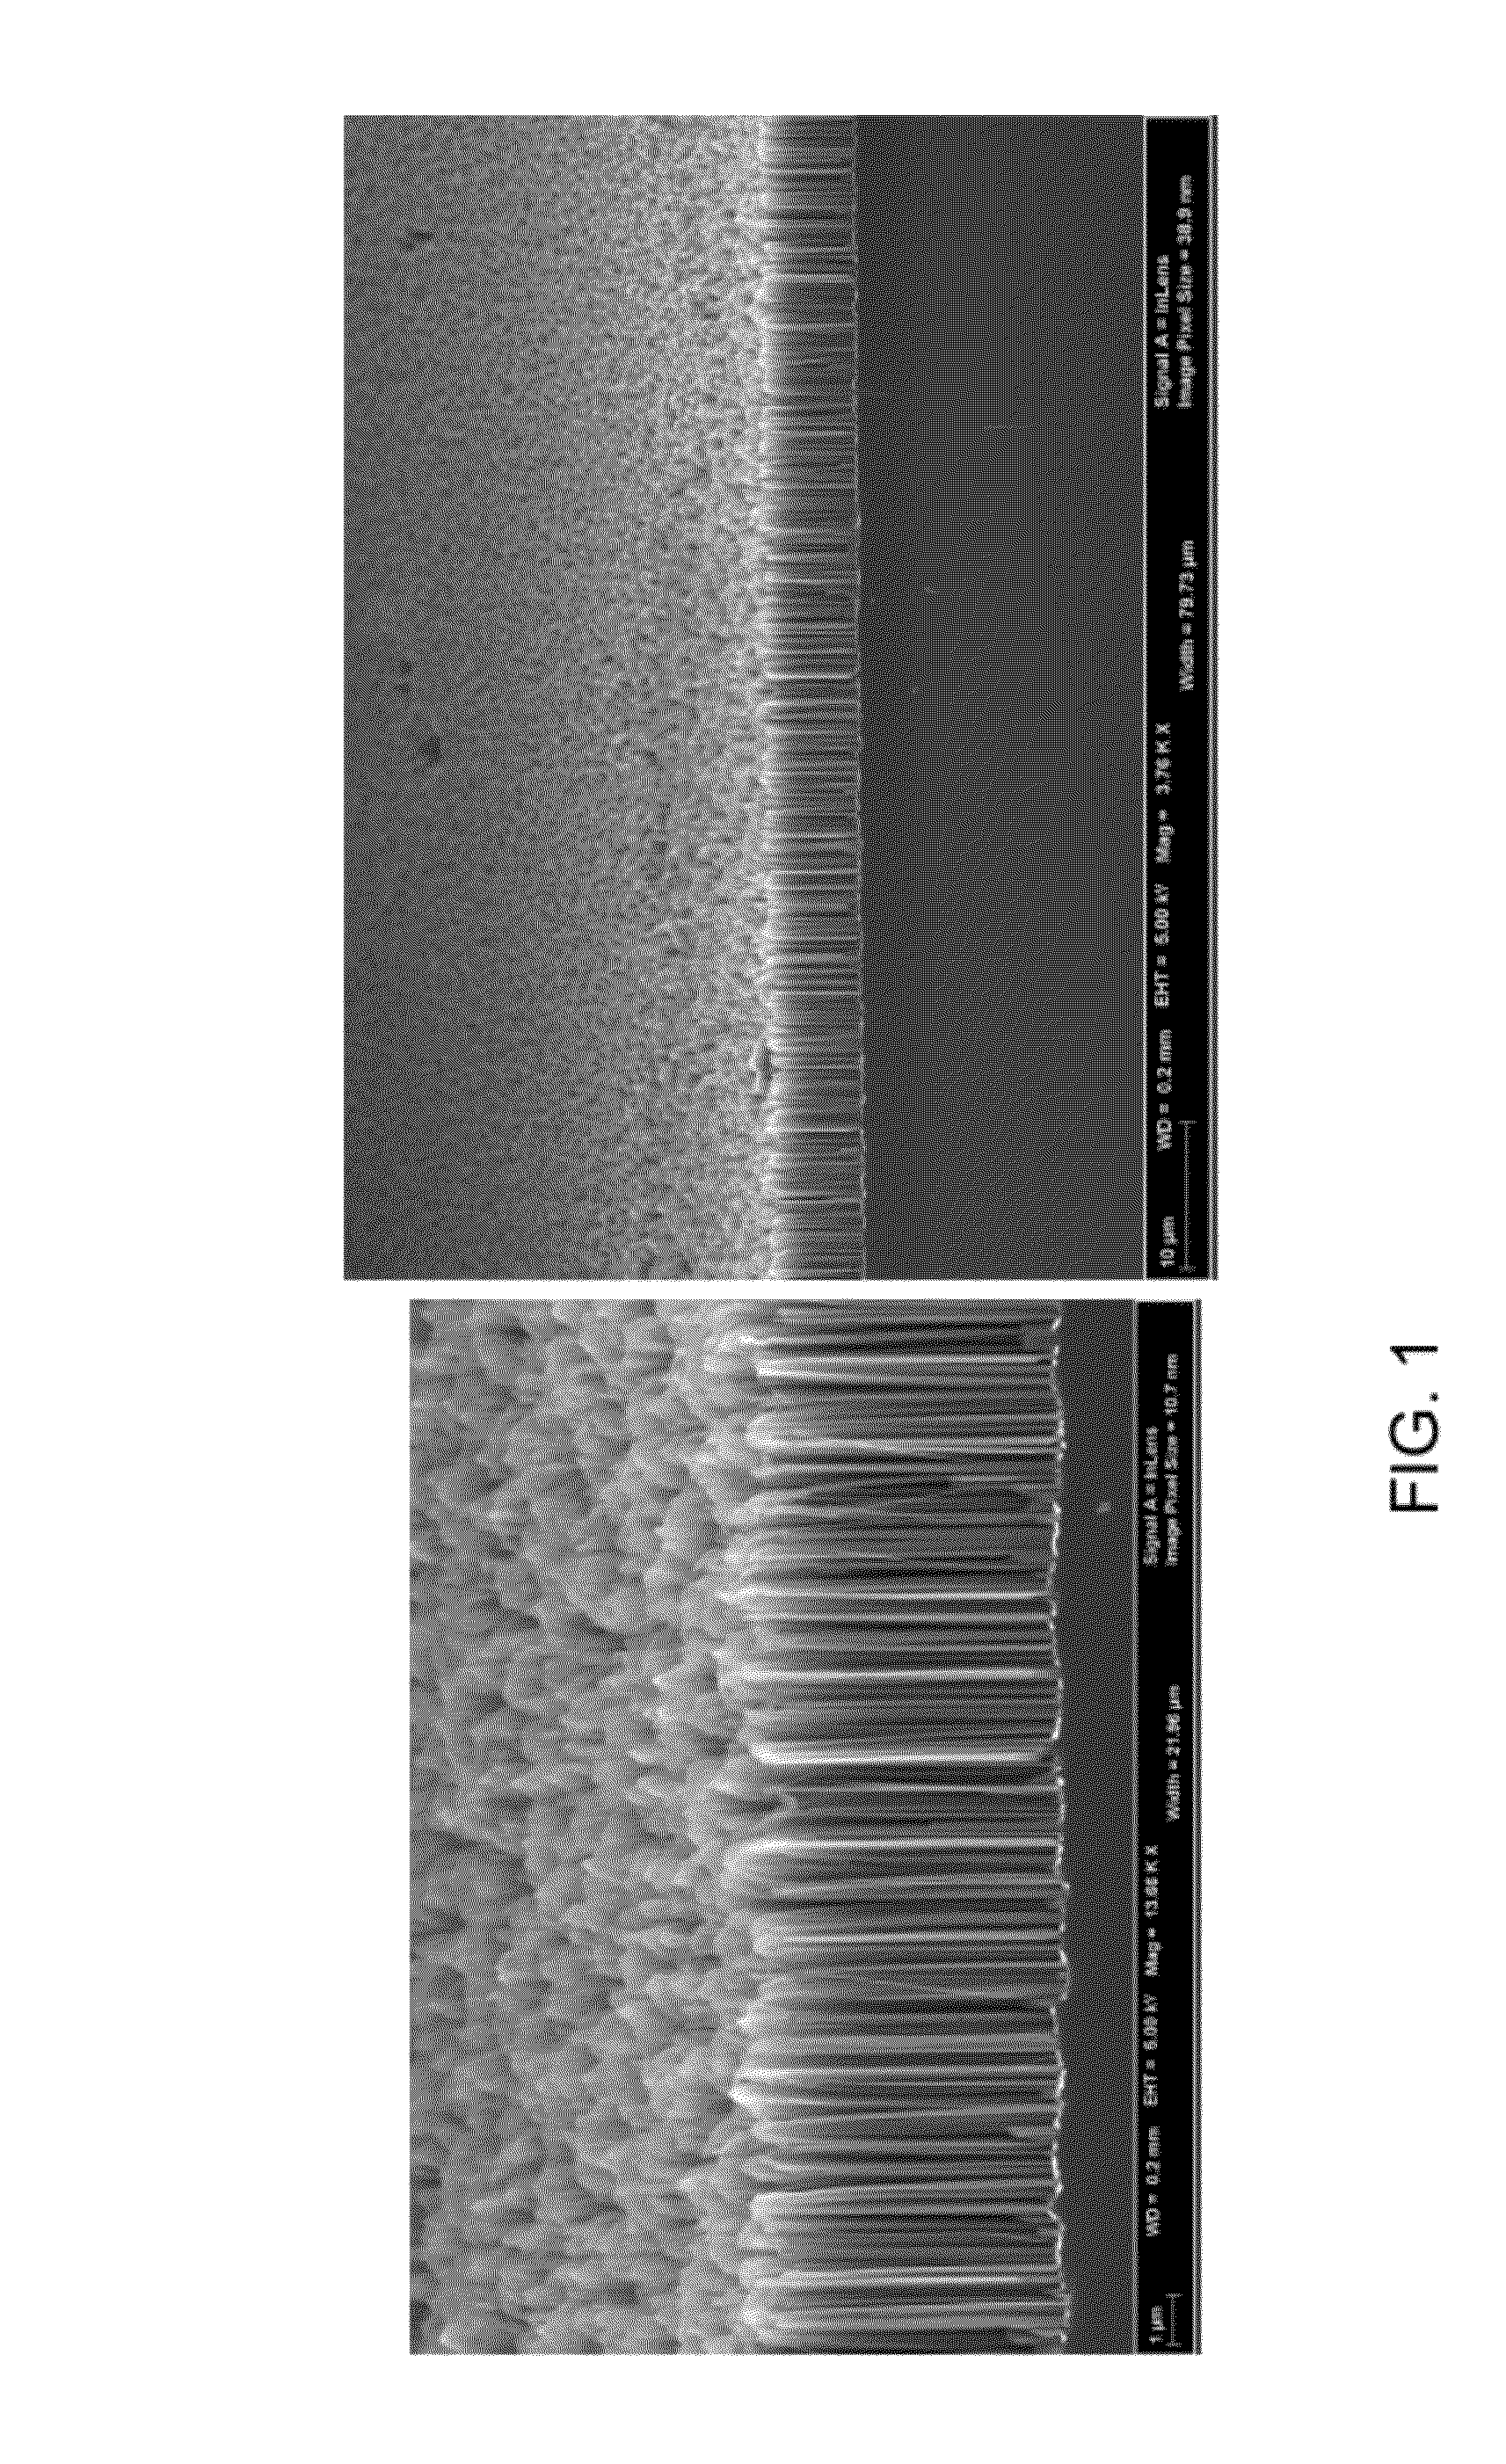 Process for fabricating nanowire arrays